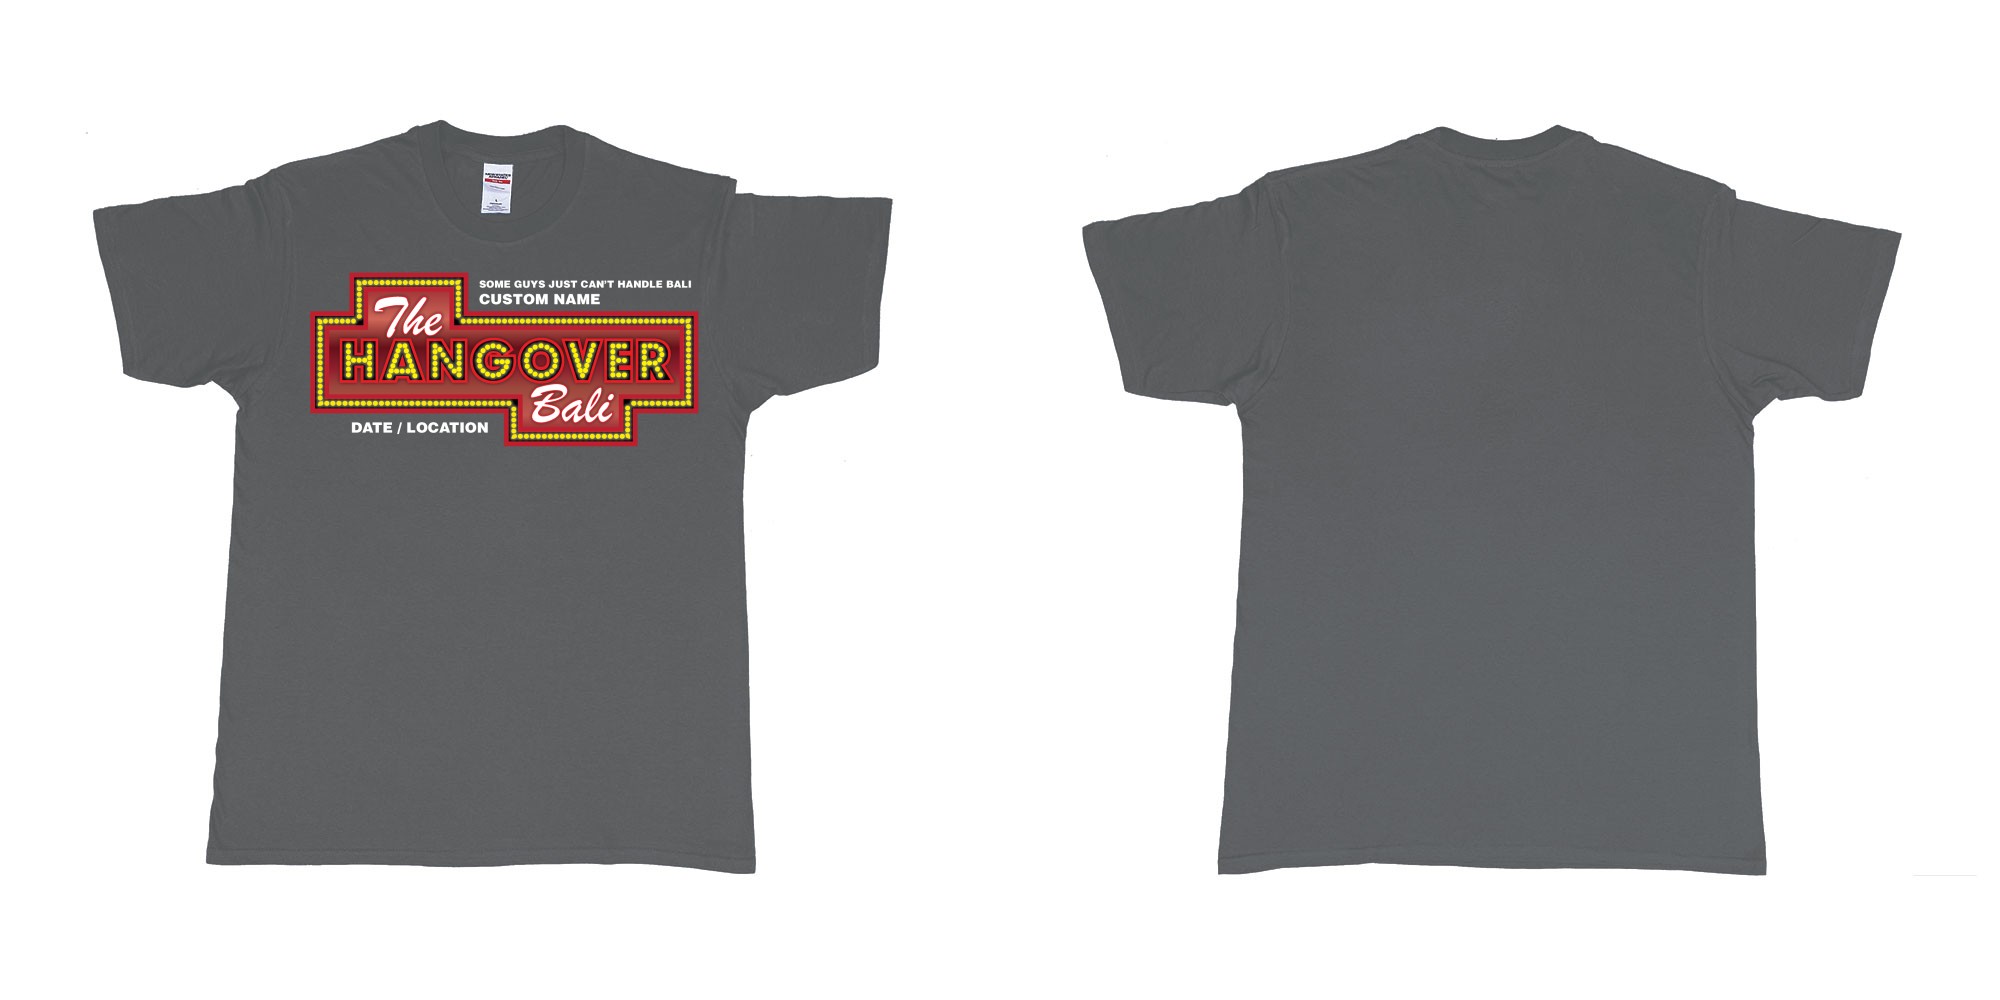 Custom tshirt design the hangover bali tour custom printing own name in fabric color charcoal choice your own text made in Bali by The Pirate Way